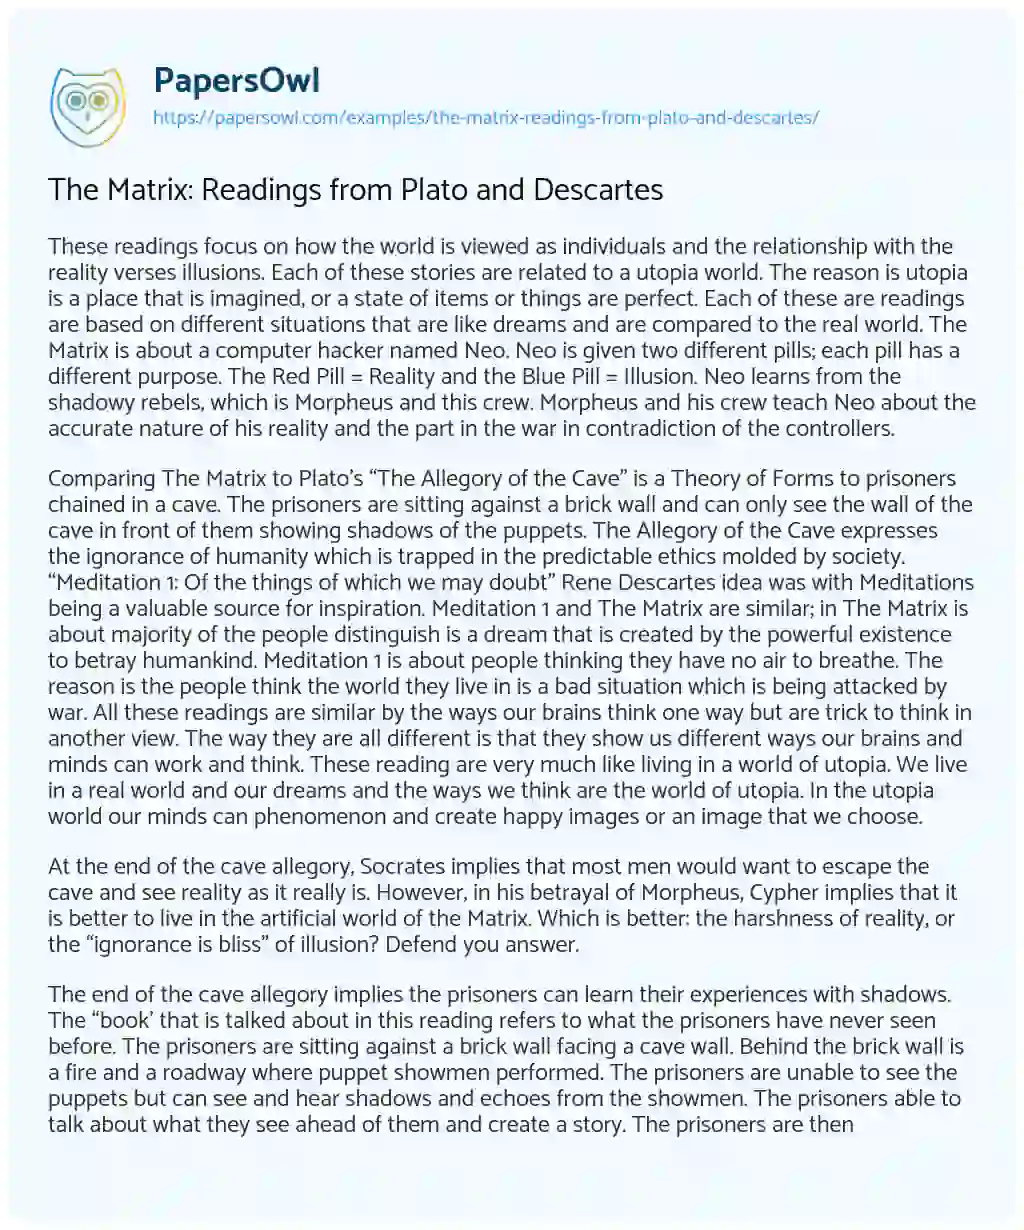 Essay on The Matrix: Readings from Plato and Descartes